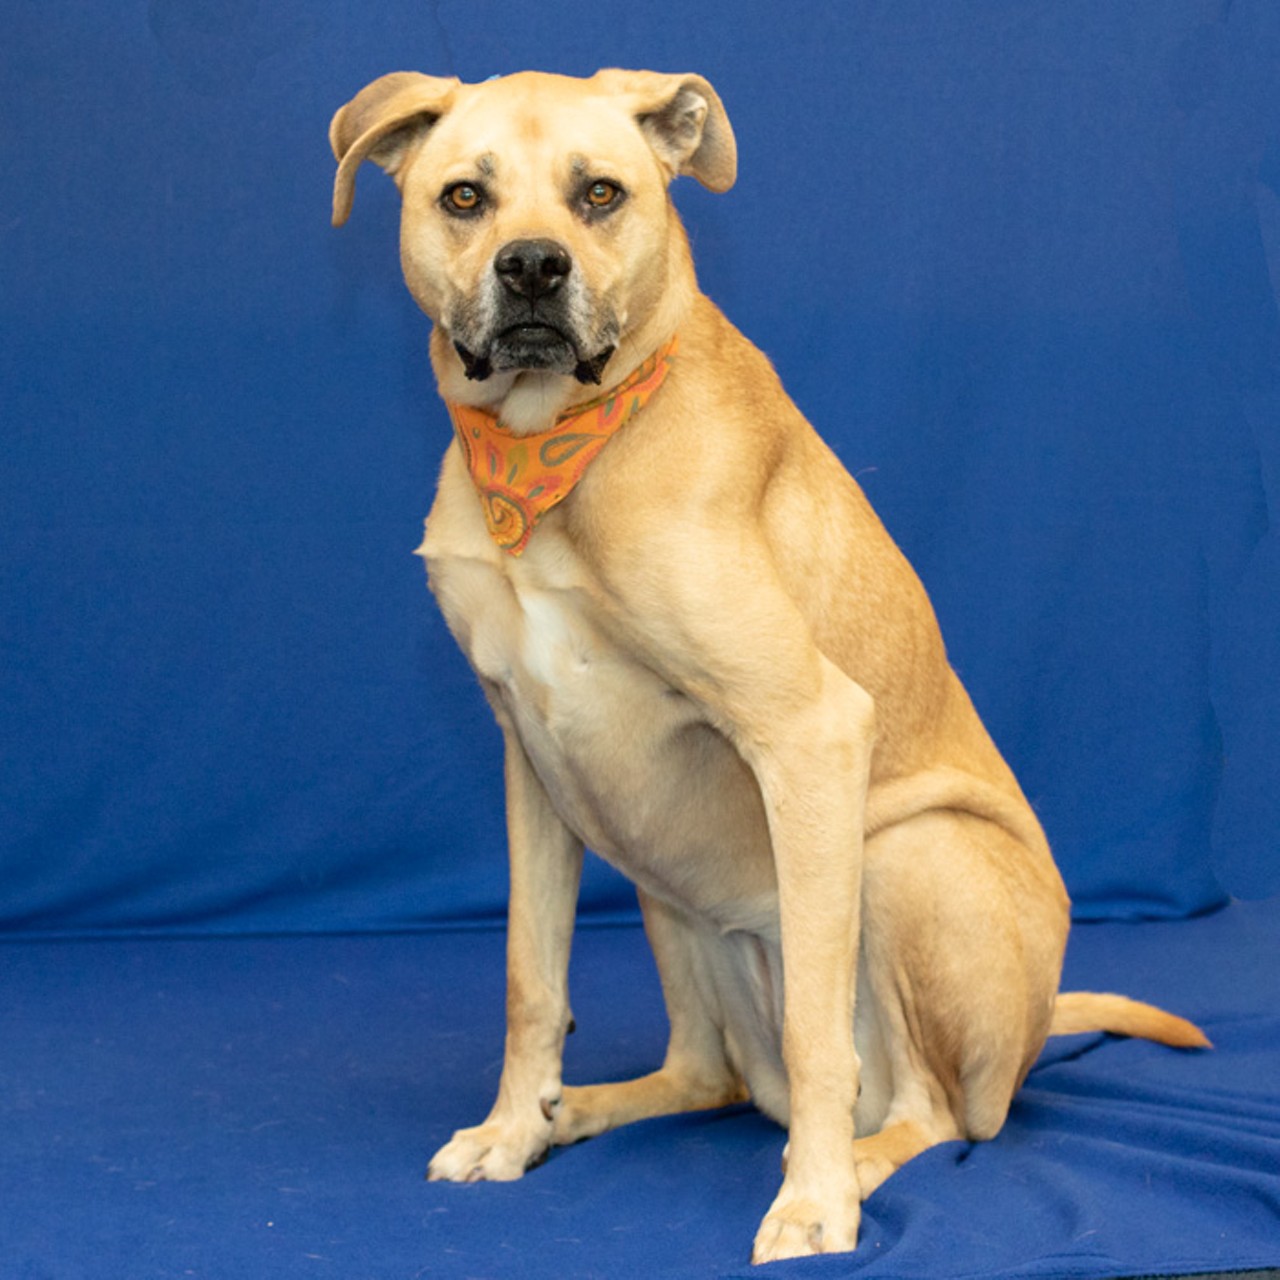 NAME: Princess Bubblegum
GENDER: Female
BREED: Labrador-Rhodesian Ridgeback mix
AGE: 3 years
WEIGHT: 67 pounds
SPECIAL CONSIDERATIONS: None
REASON I CAME TO MHS: Homeless in Westland
LOCATION: Berman Center for Animal Care
ID NUMBER: 869299